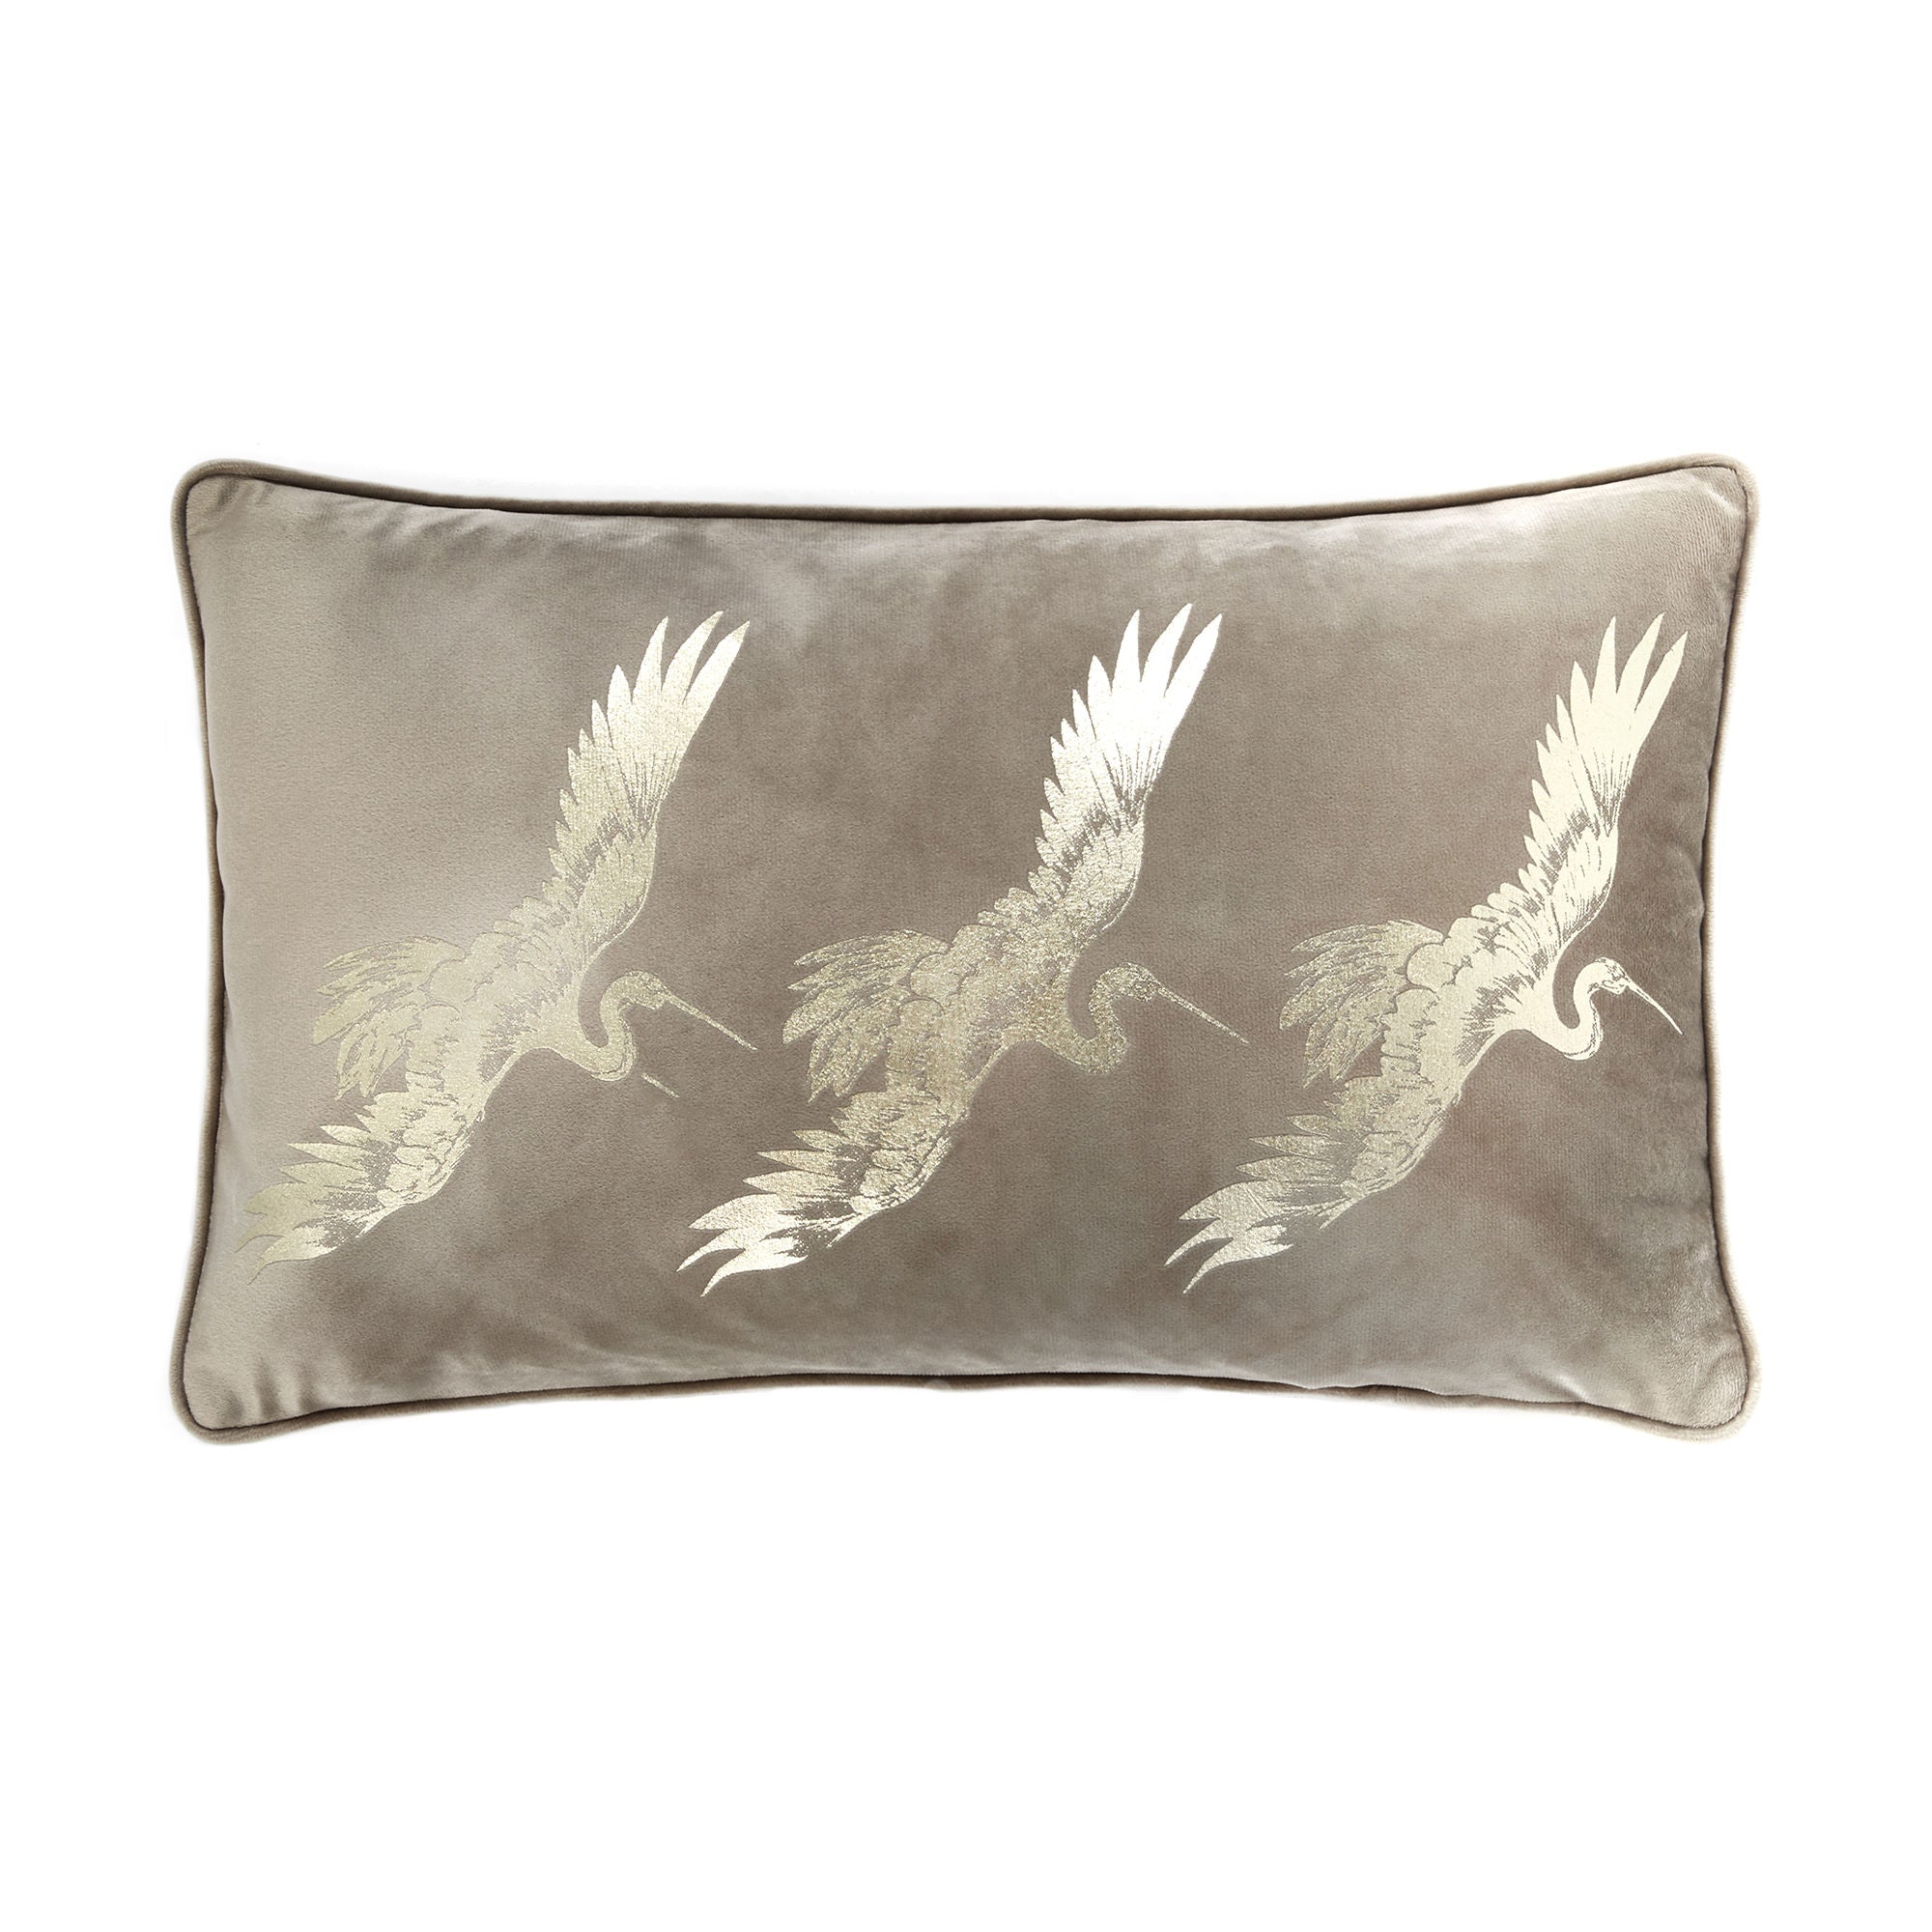 Qing Cushion by Laurence Llewelyn-Bowen in Oyster 28 x 48cm - Cushion - Laurence Llewelyn-Bowen